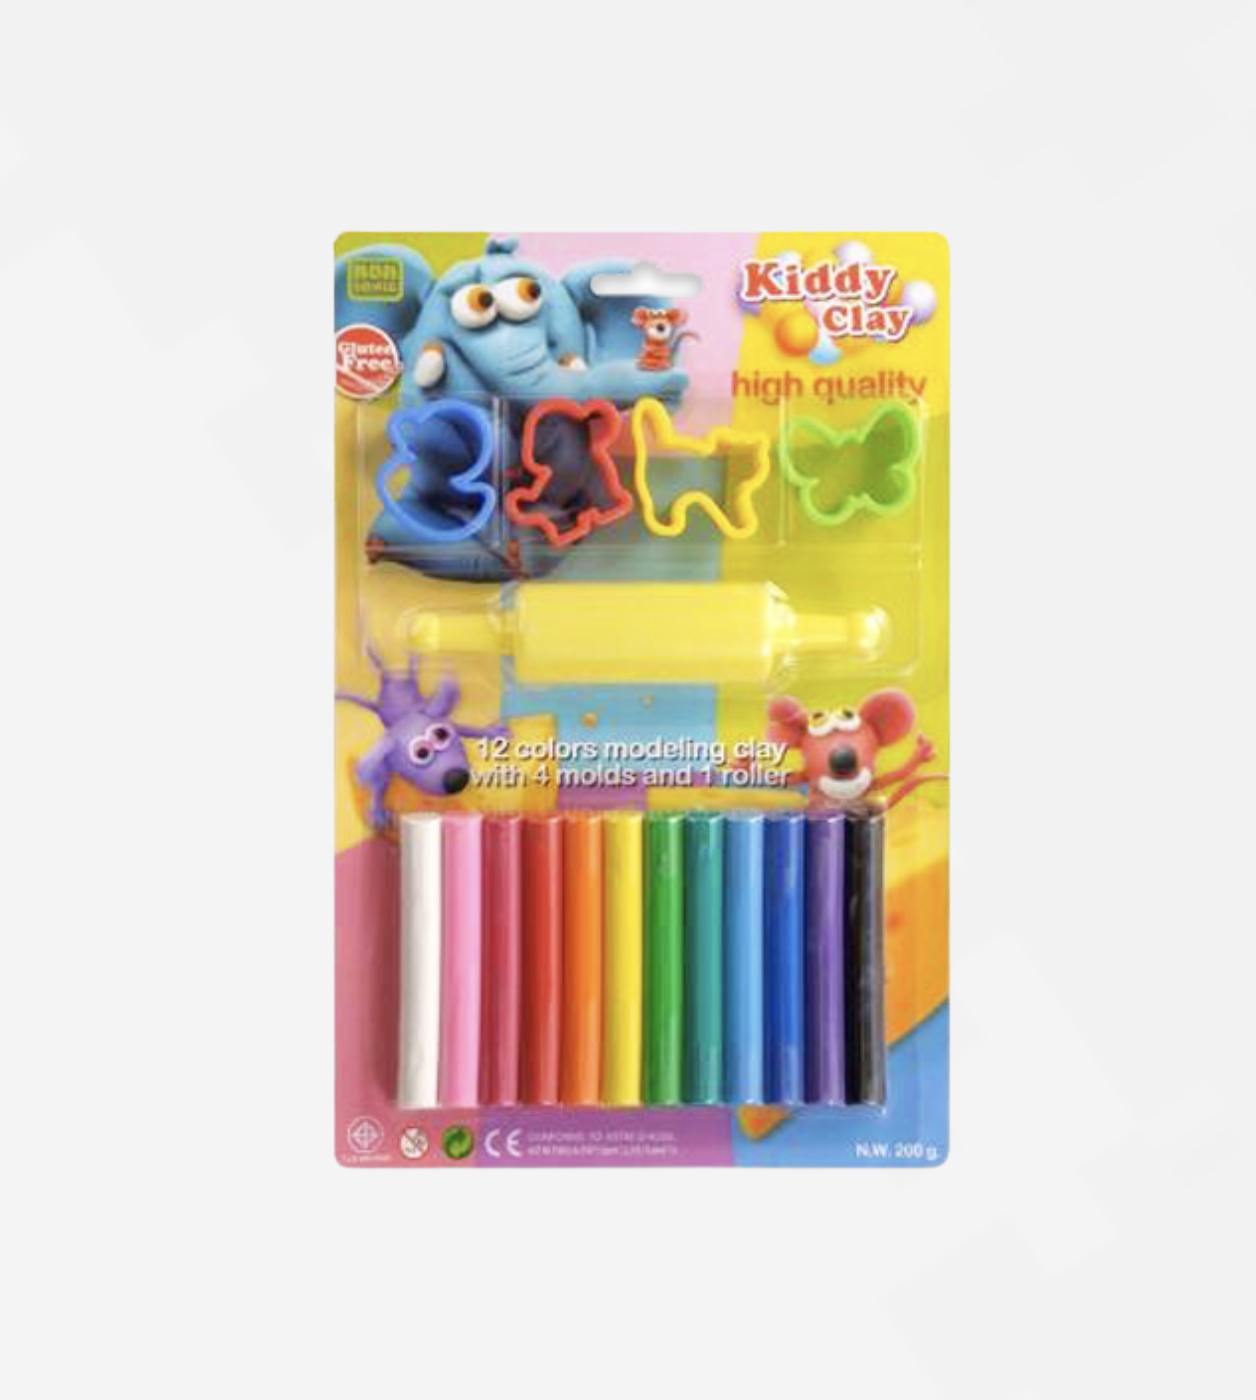 Kiddy clay - 12 colors molding clay